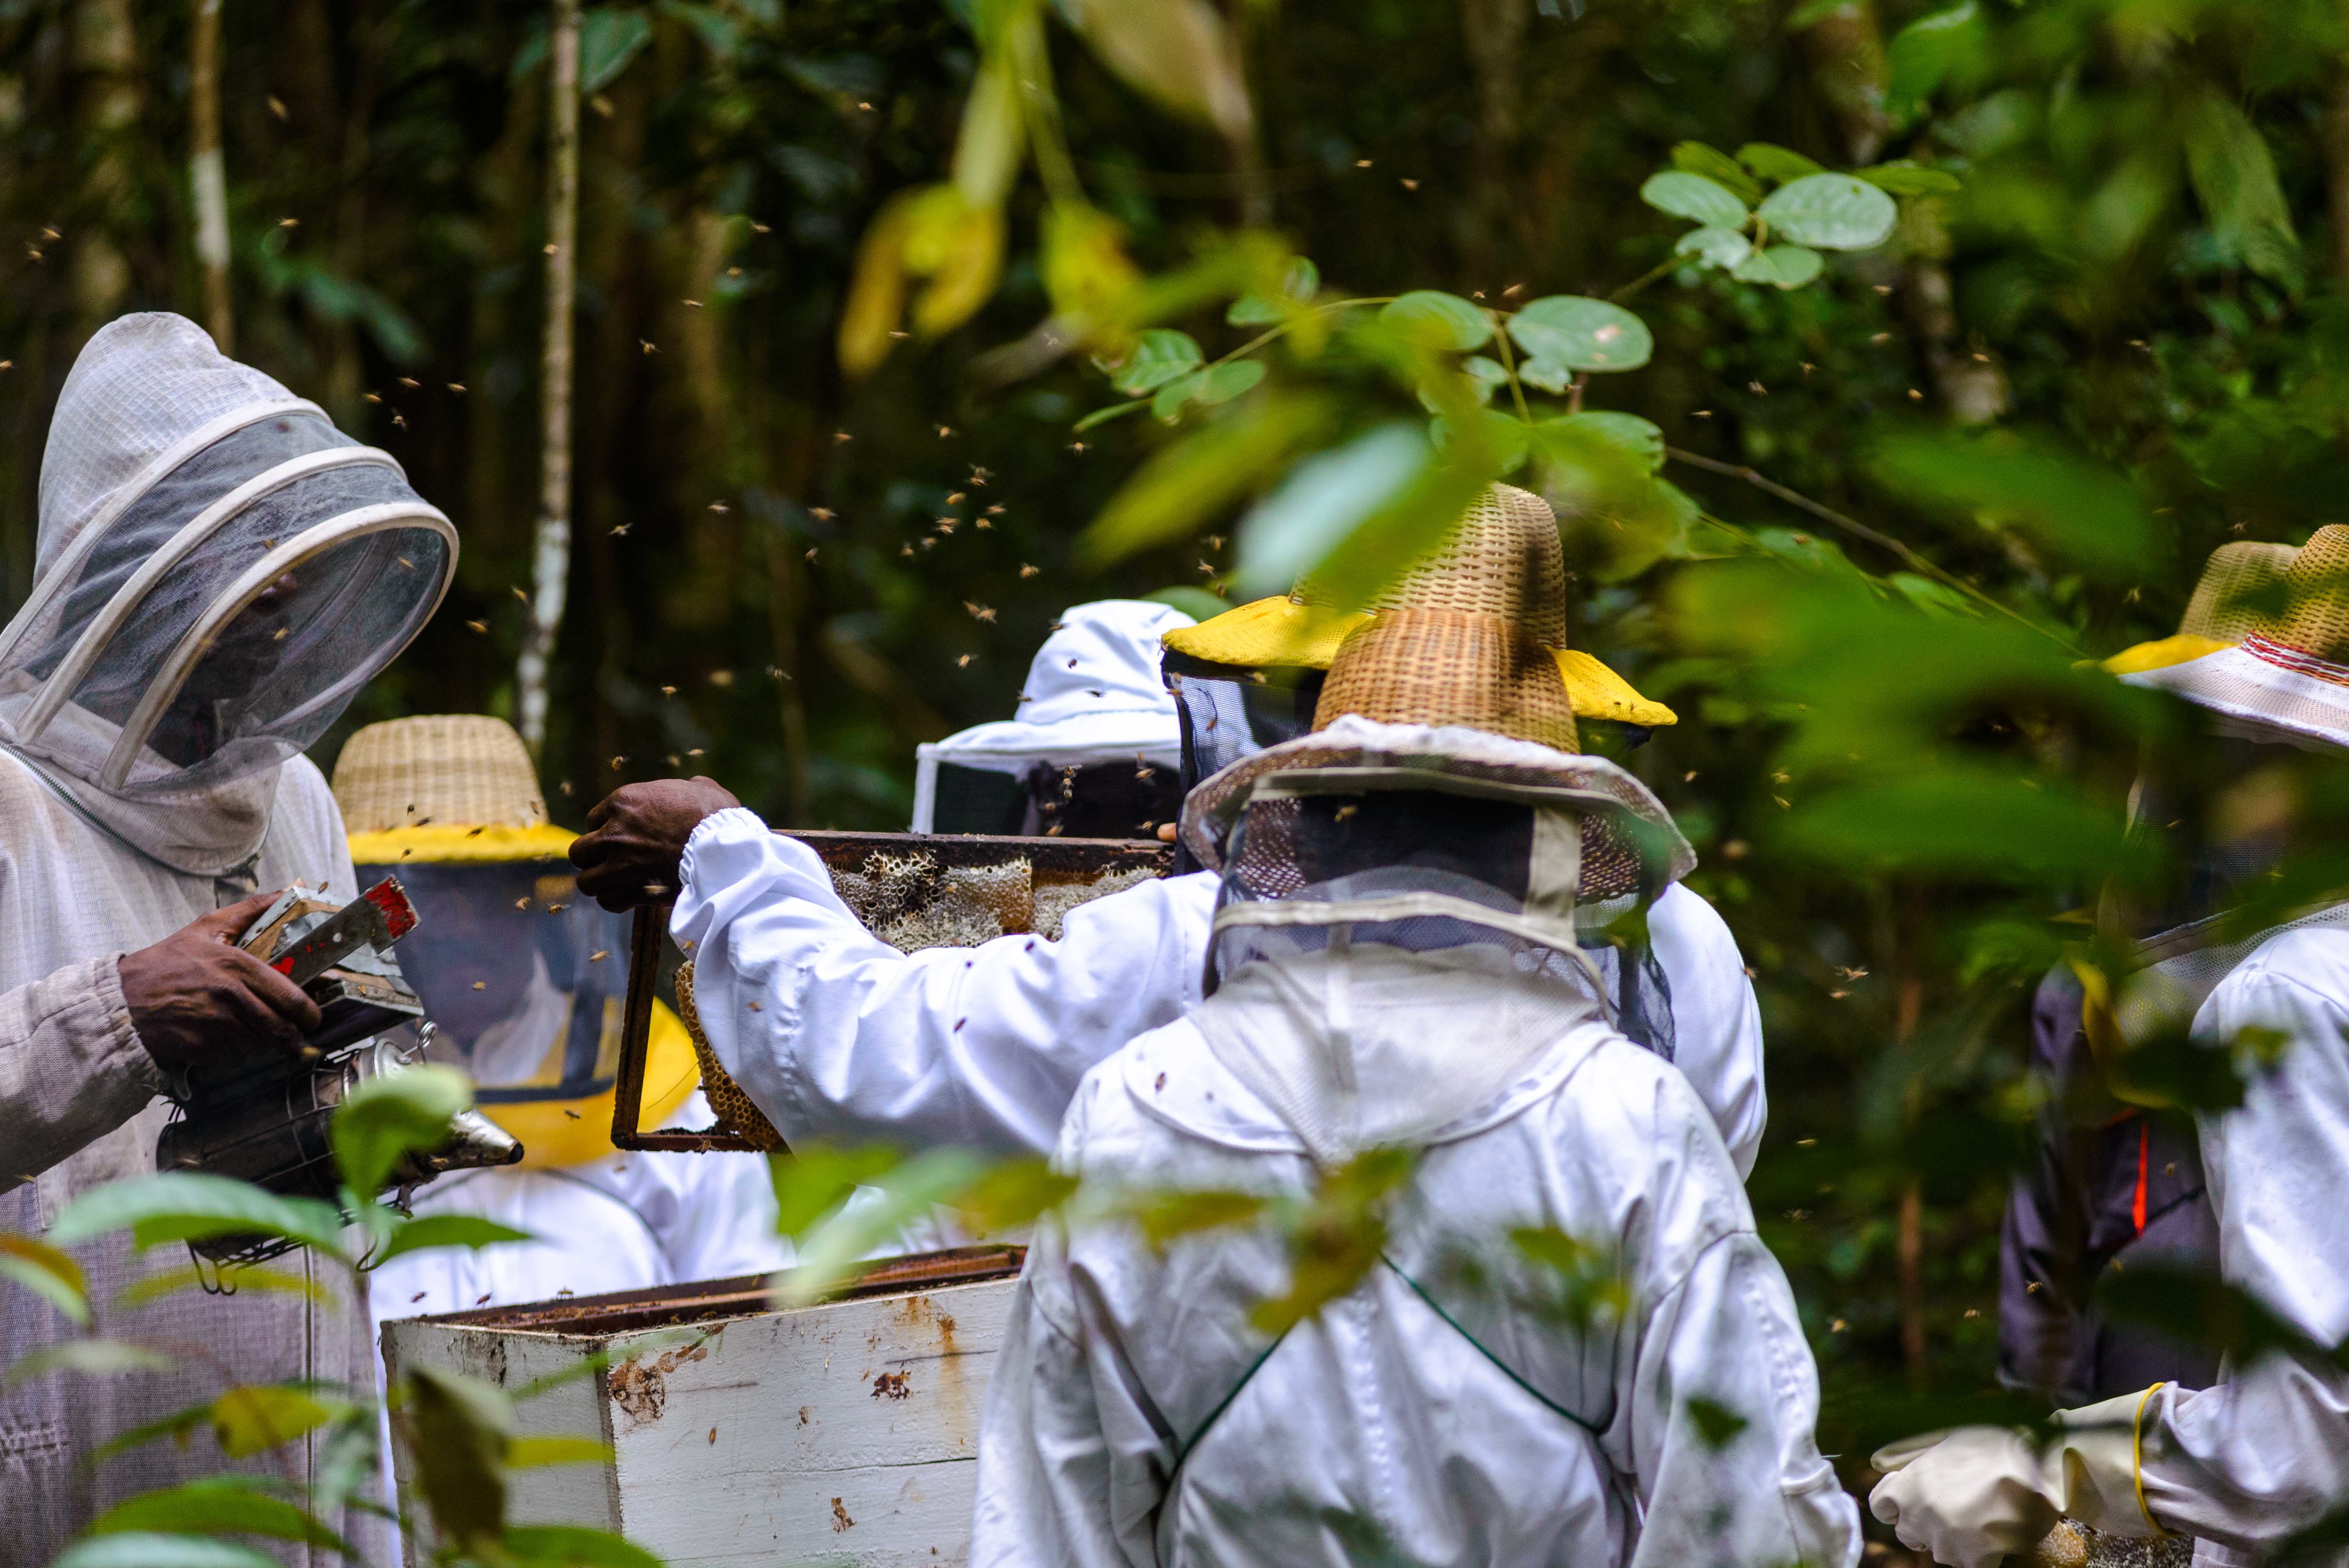 Participants learn, during a training session, how to safely remove honey from hives.